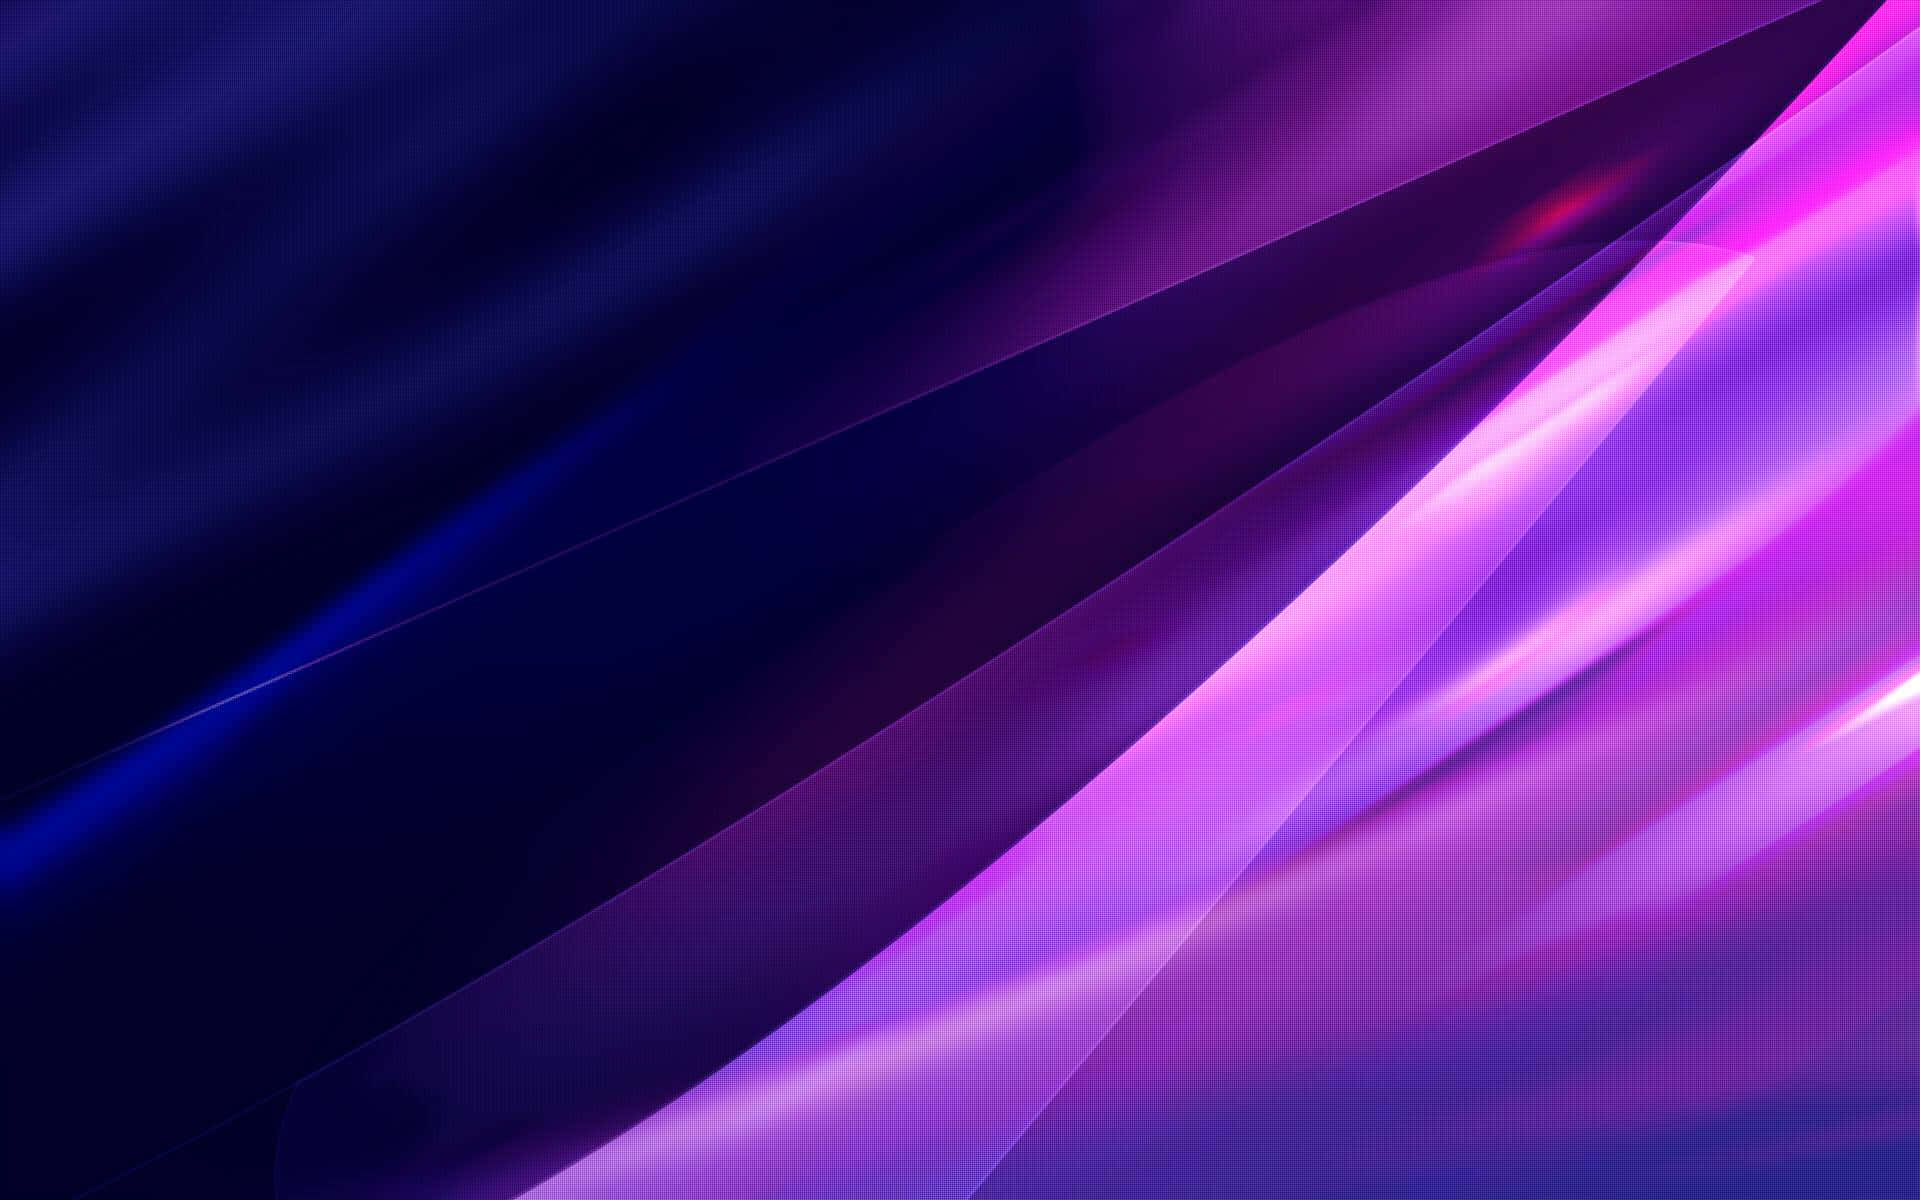 A Purple And Blue Abstract Background Wallpaper